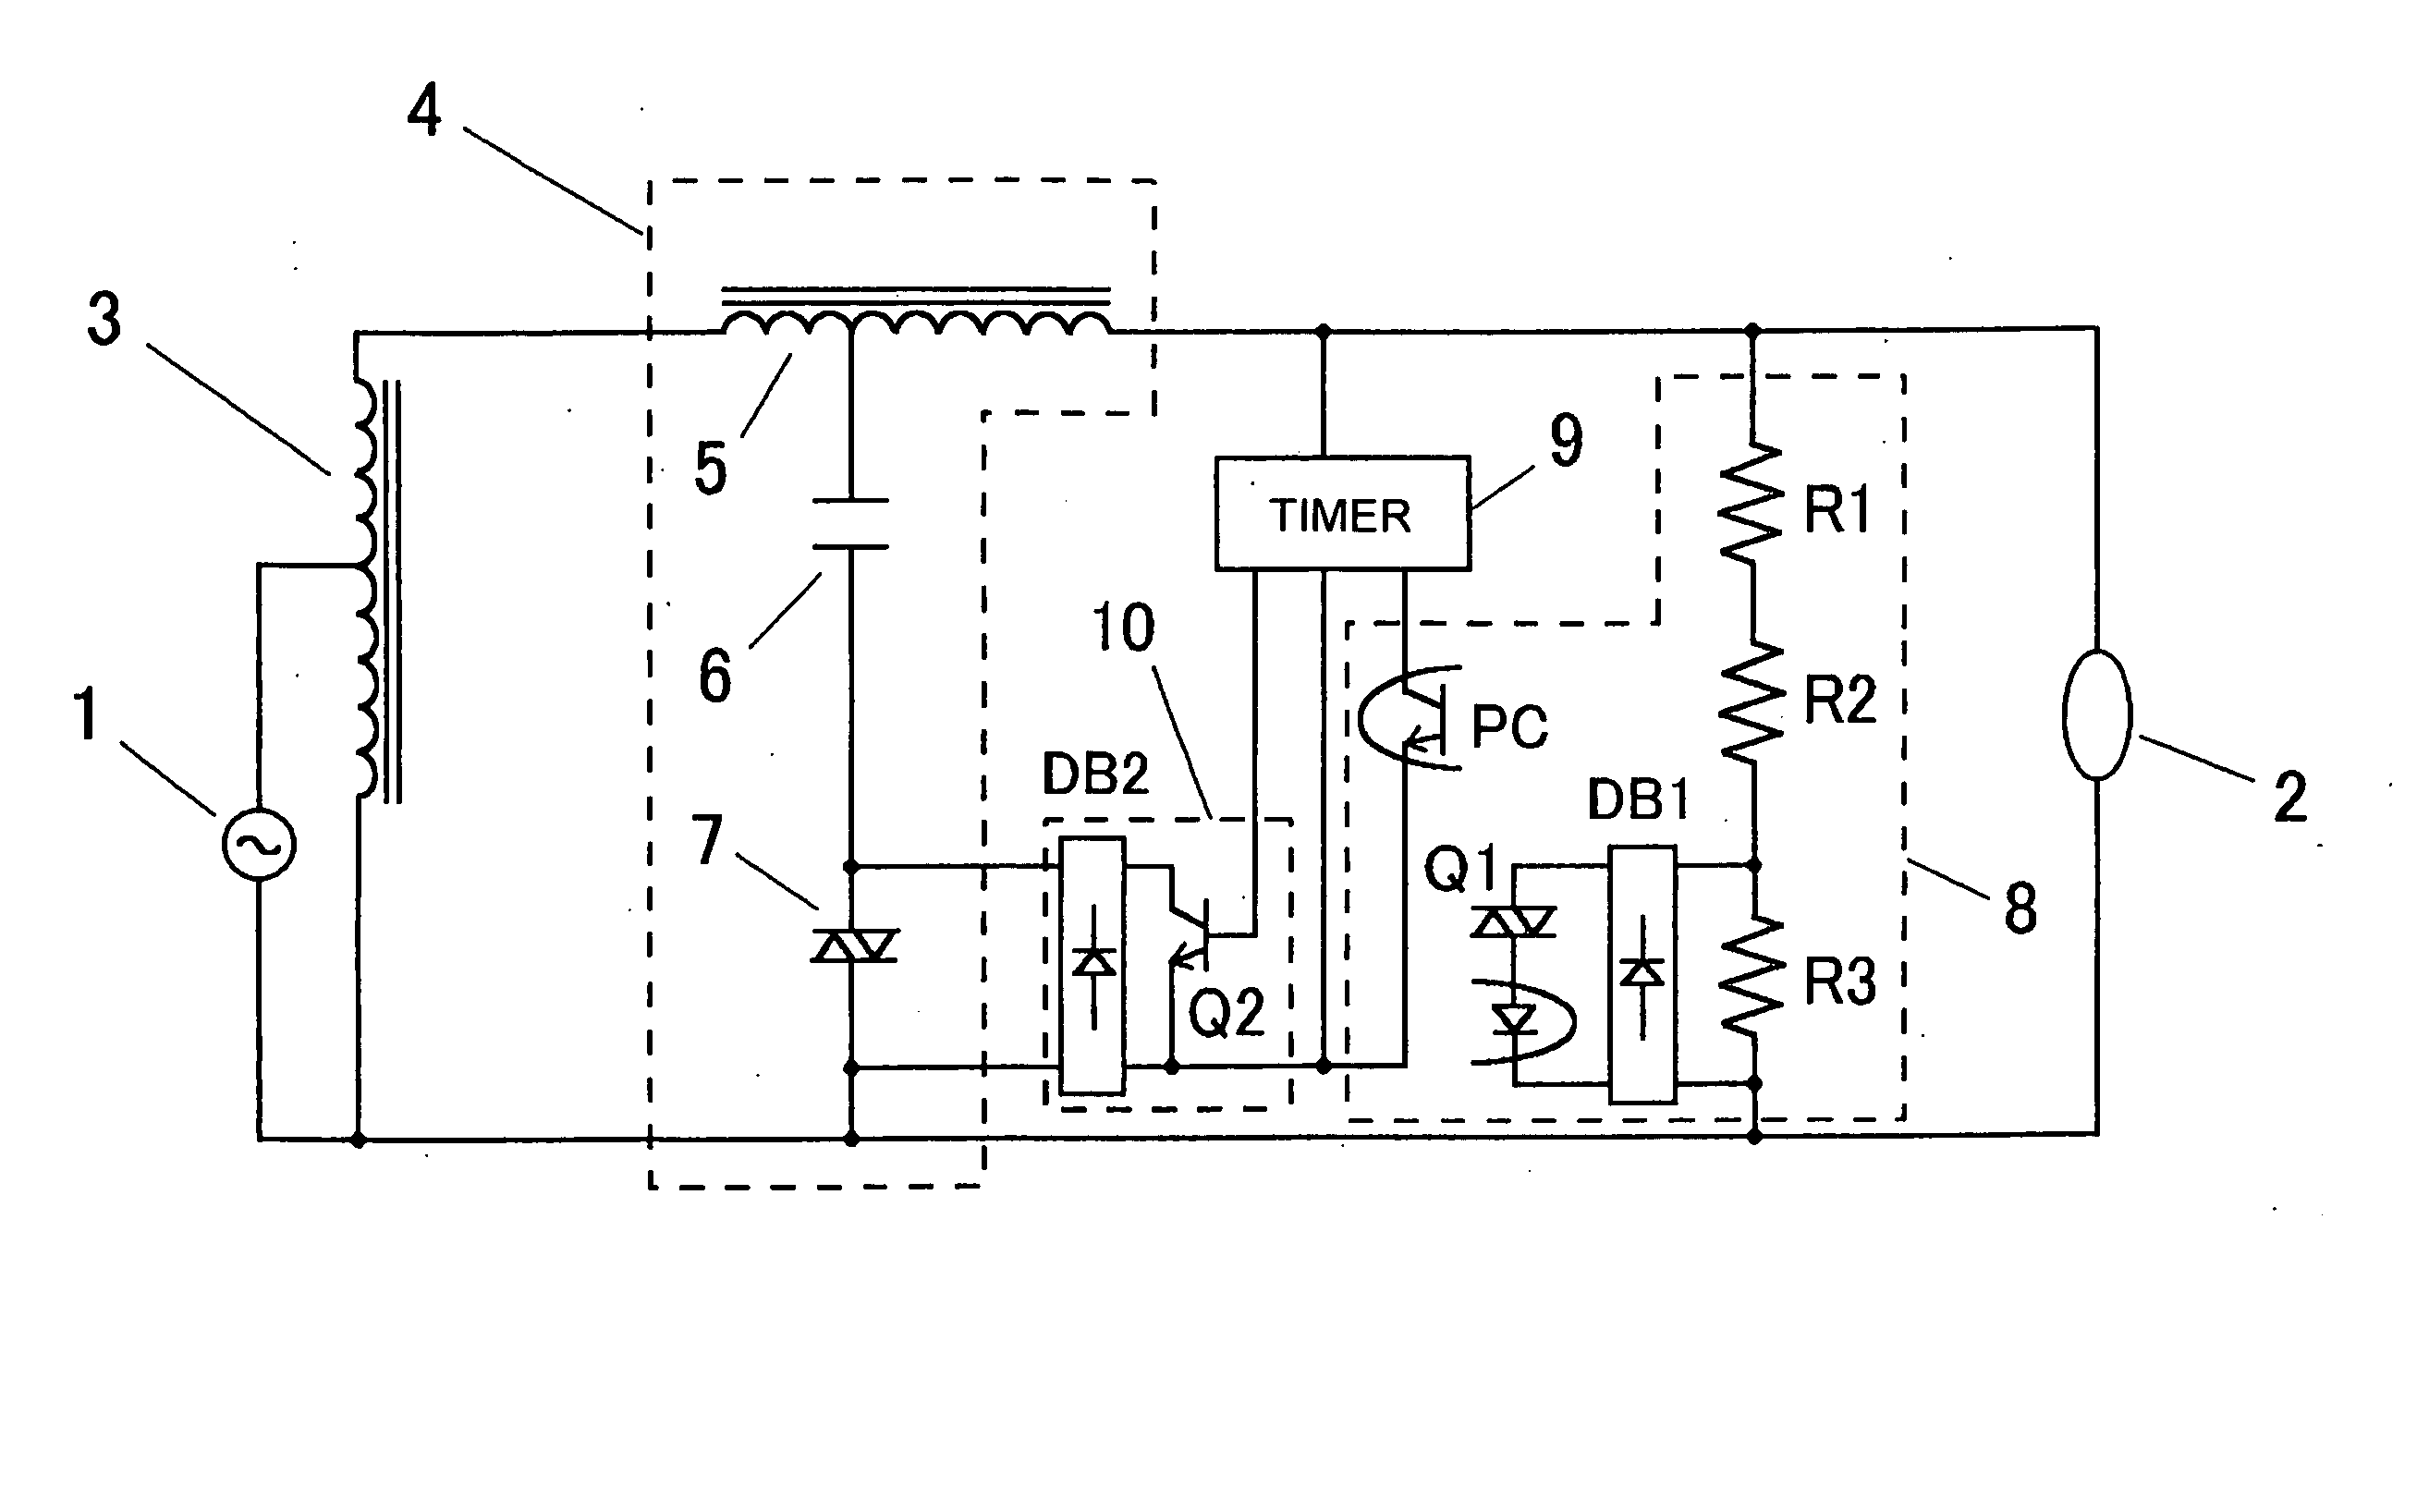 Lighting device for a high-pressure discharge lamp and lighting equipment employing same